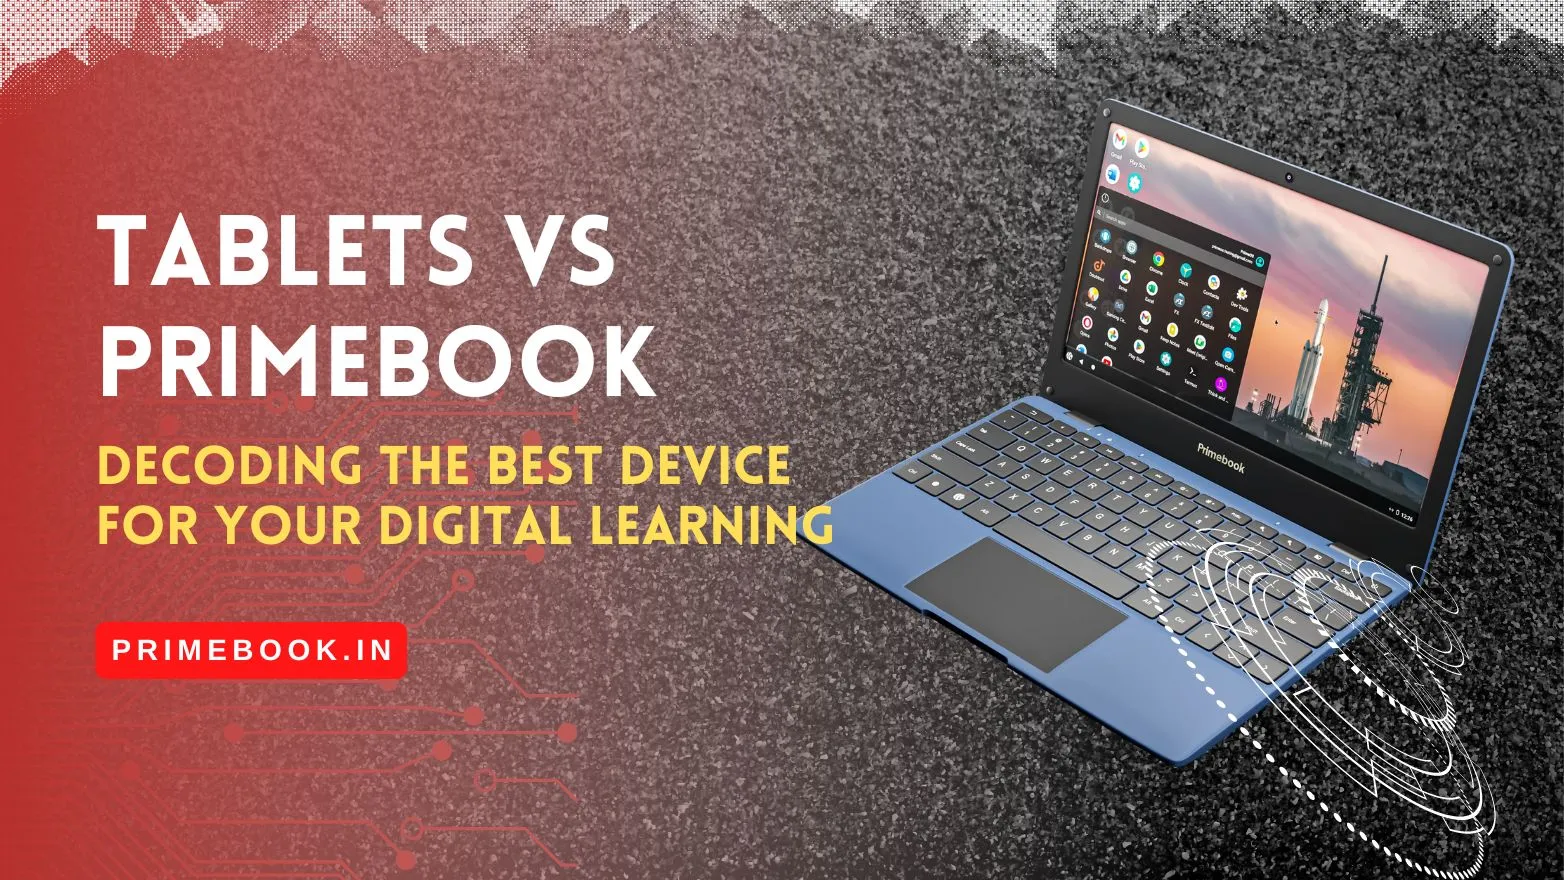 Primebook Vs. Tablets: Decoding The Best Device For Your Digital Learning